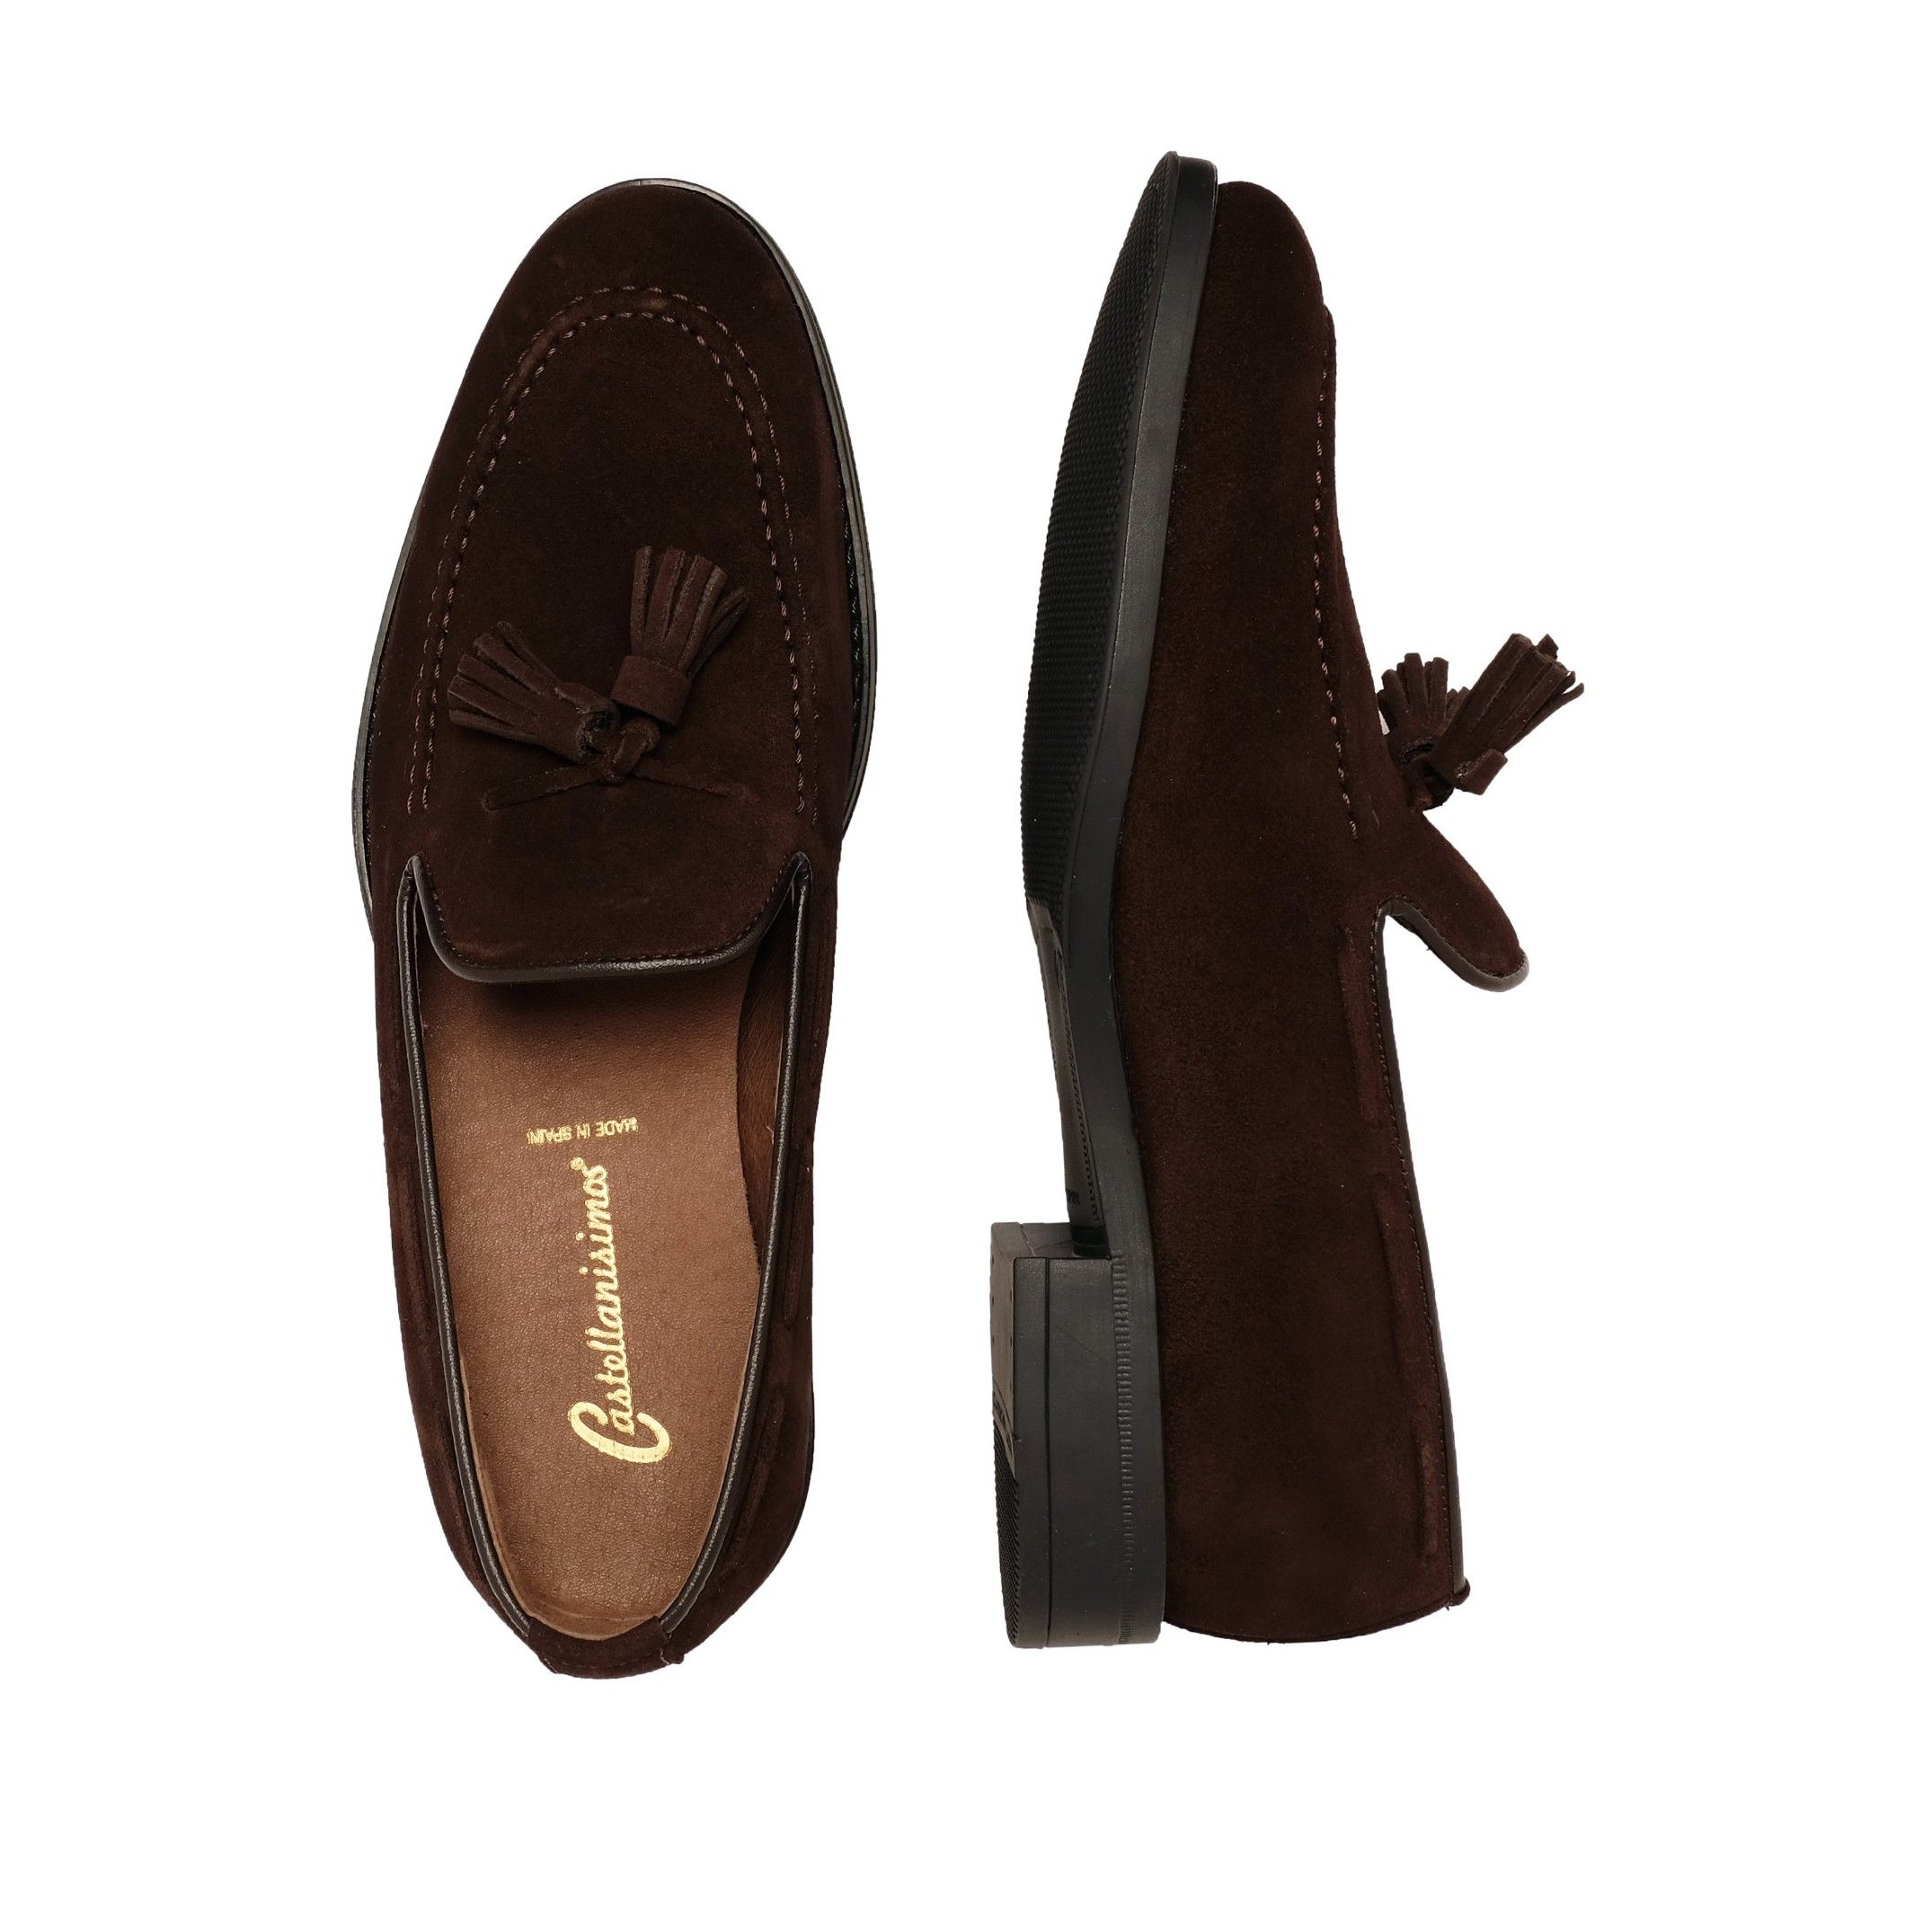 Leather moccasin with tassels for men. Upper and inner made of leather. Rubber sole. Made in Spain.